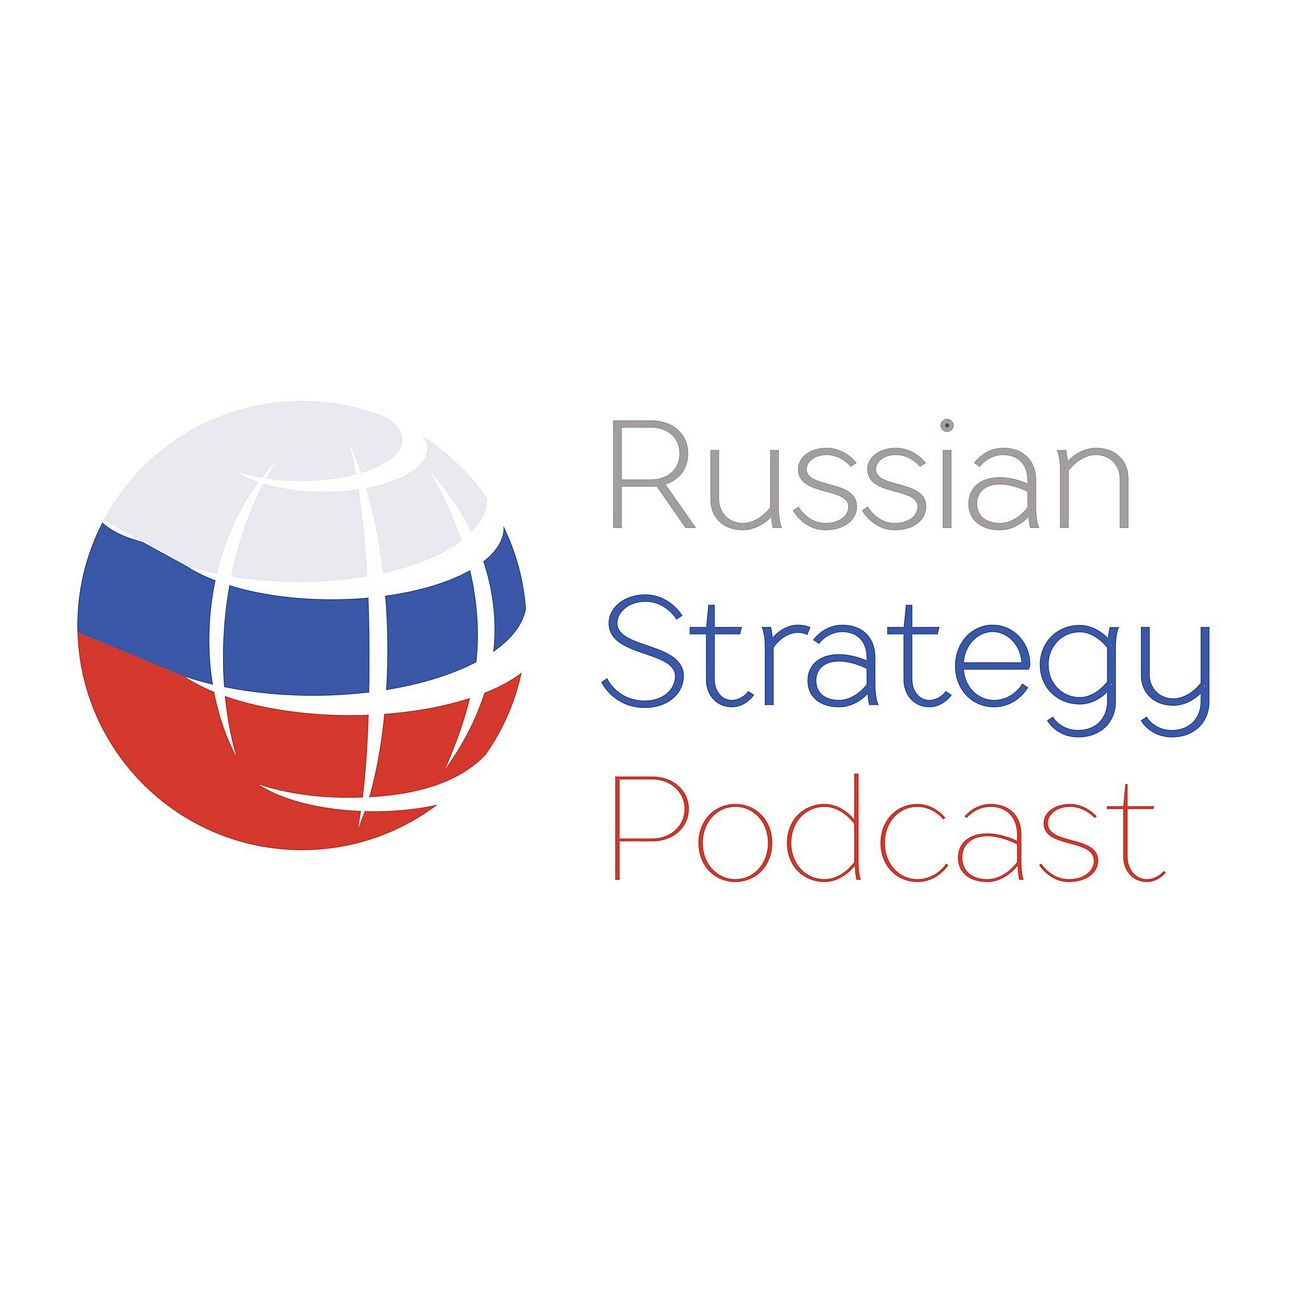 Russian strategy podcast